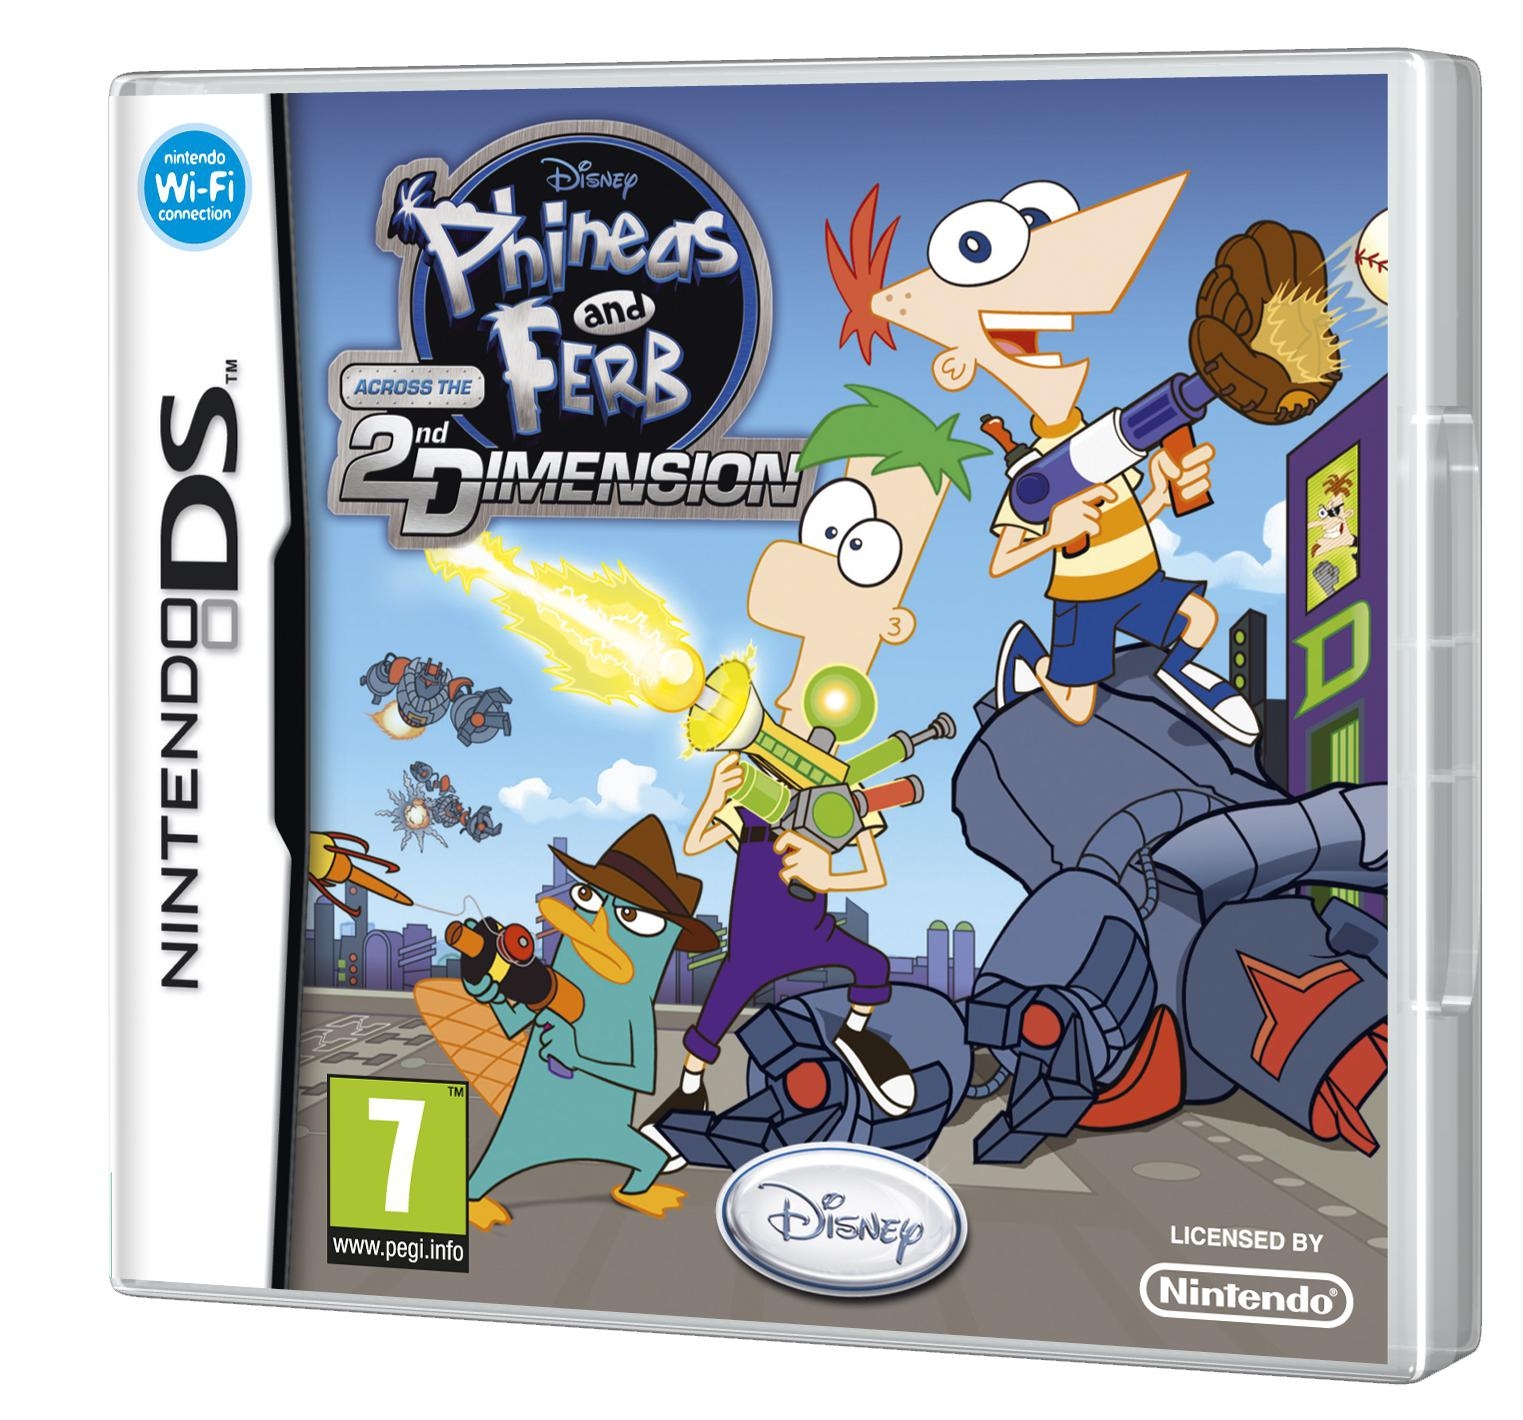 Disney Interactive Studios Phineas and Ferb Across the 2nd Dimension Nintendo DS